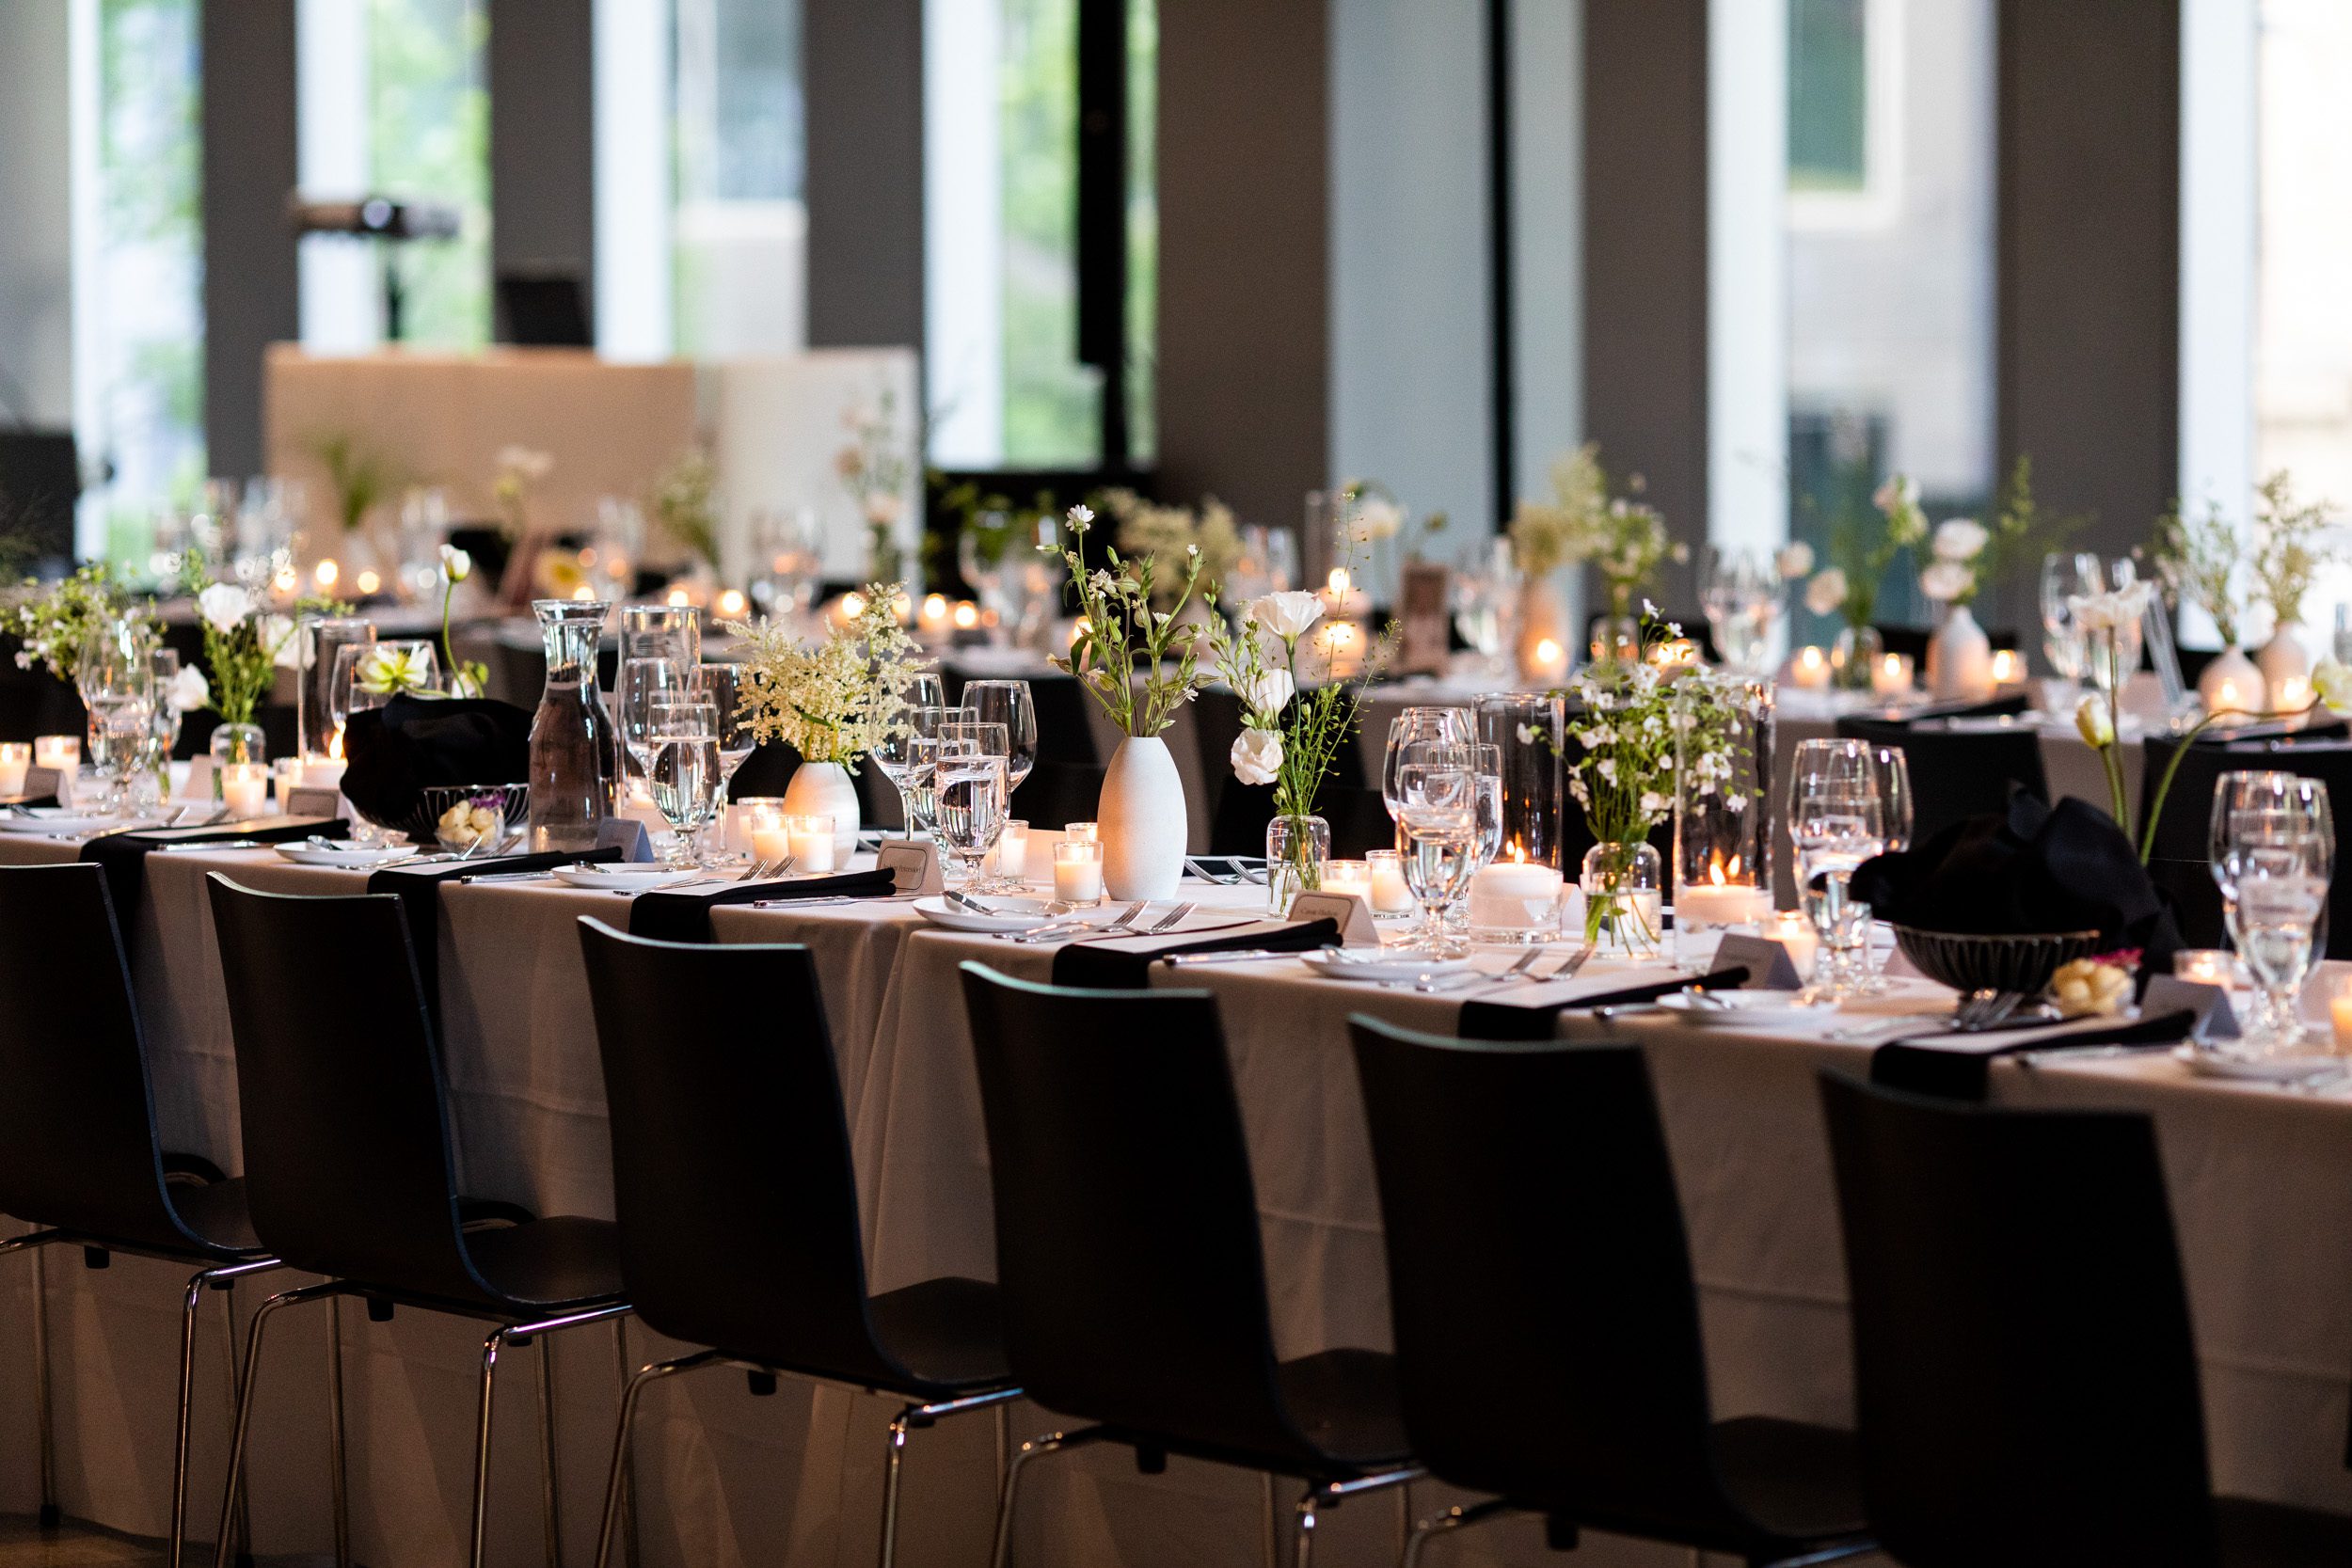 Elegant, modern, black tie wedding at the Seattle art museum. This downtown Seattle wedding was luxurious and full of custom adornments.